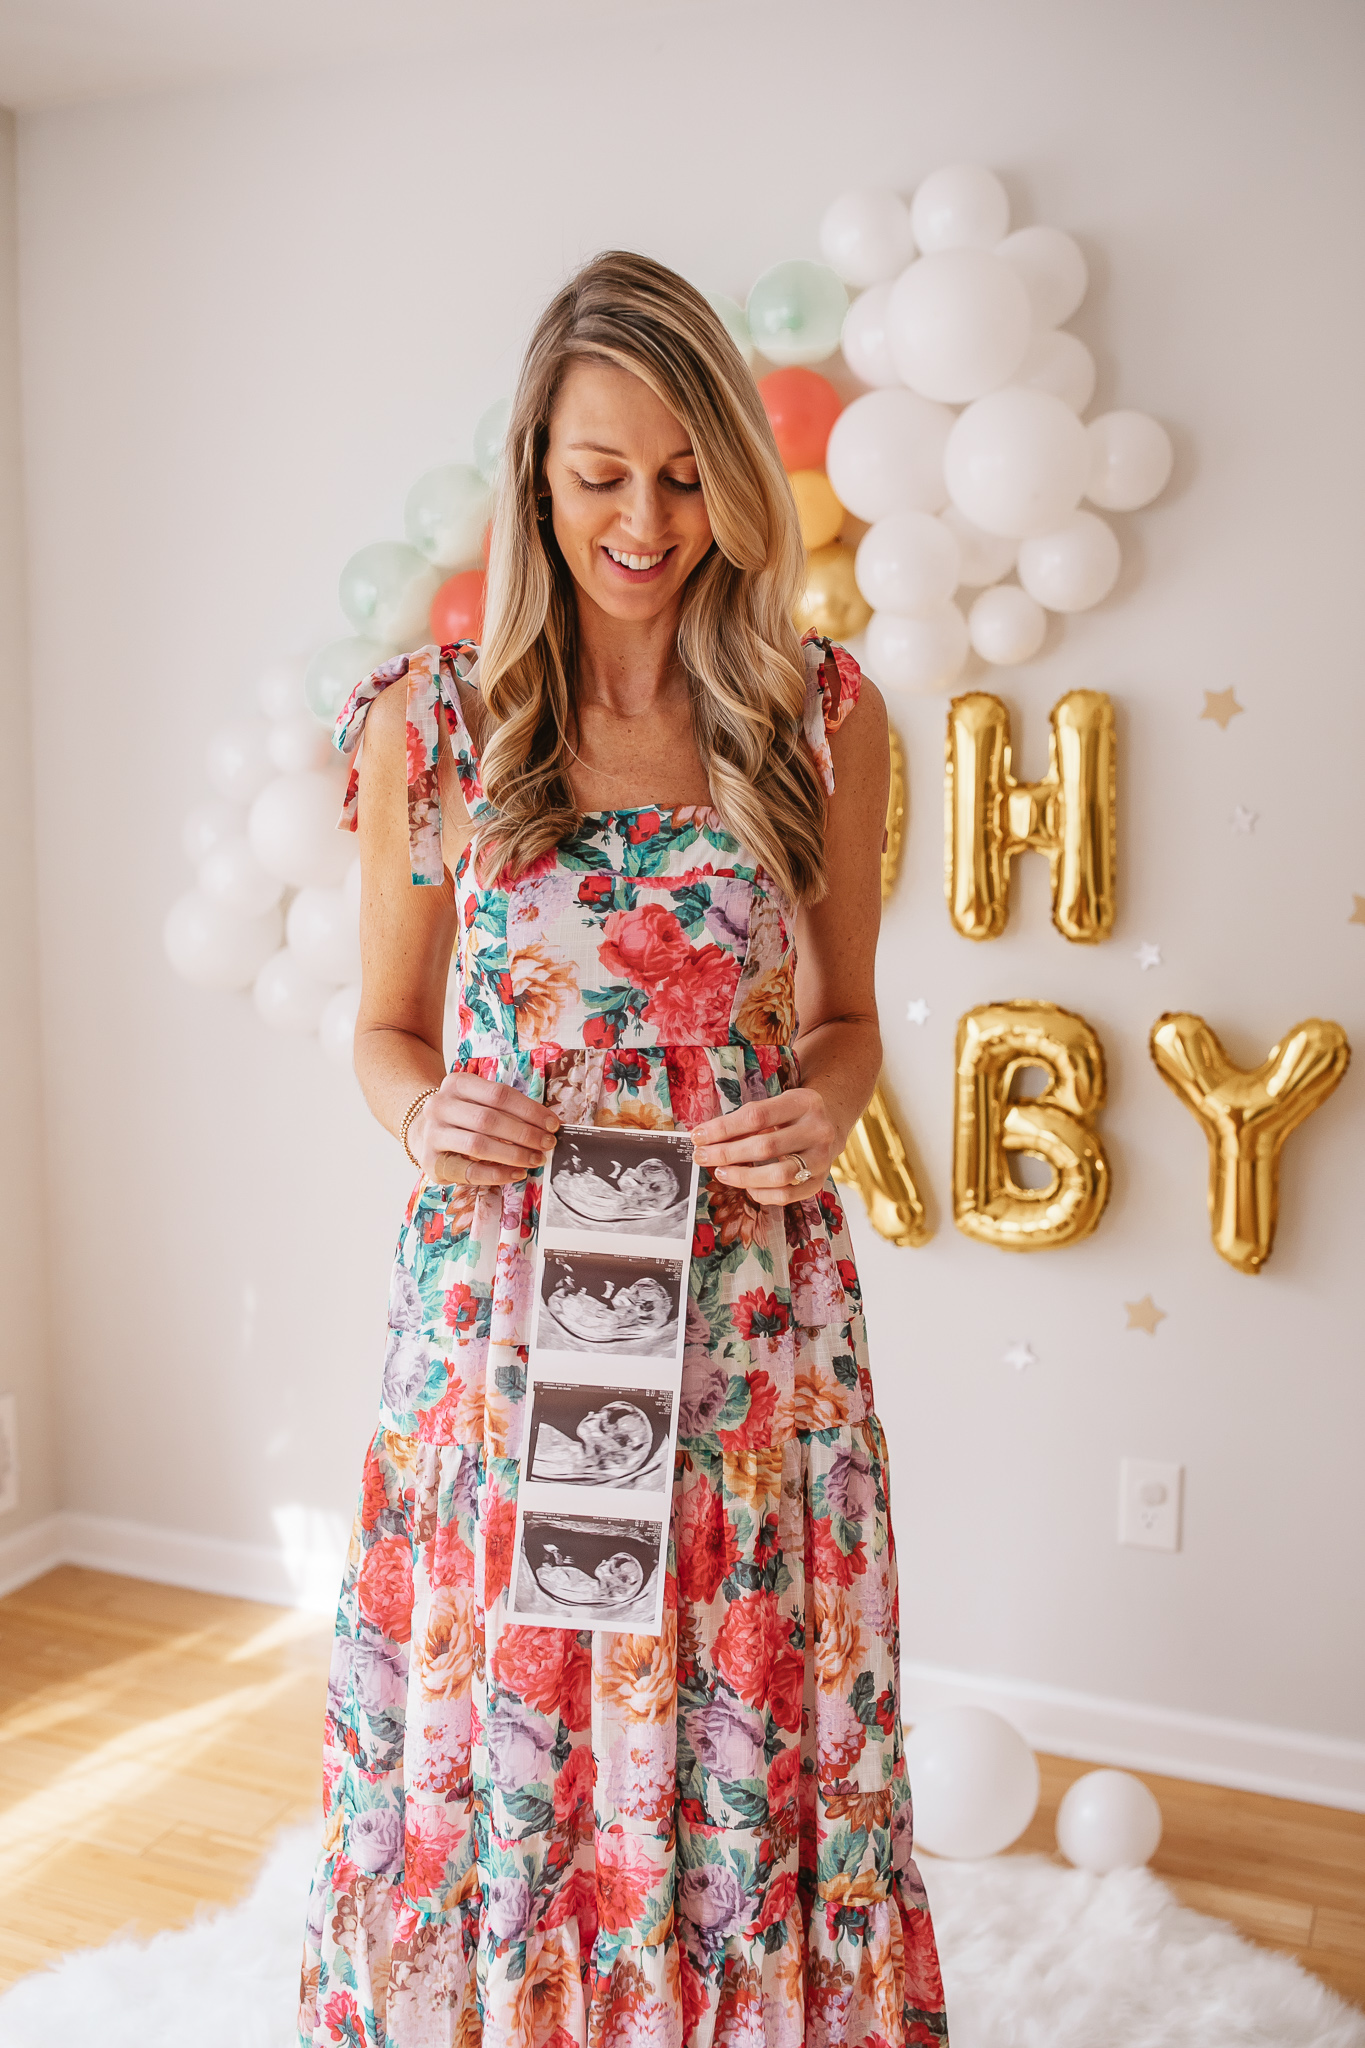 DIY Rainbow Baby Pregnancy Announcement. Mommy to be with the ultrasound. Rainbow baby balloon backdrop for photos.